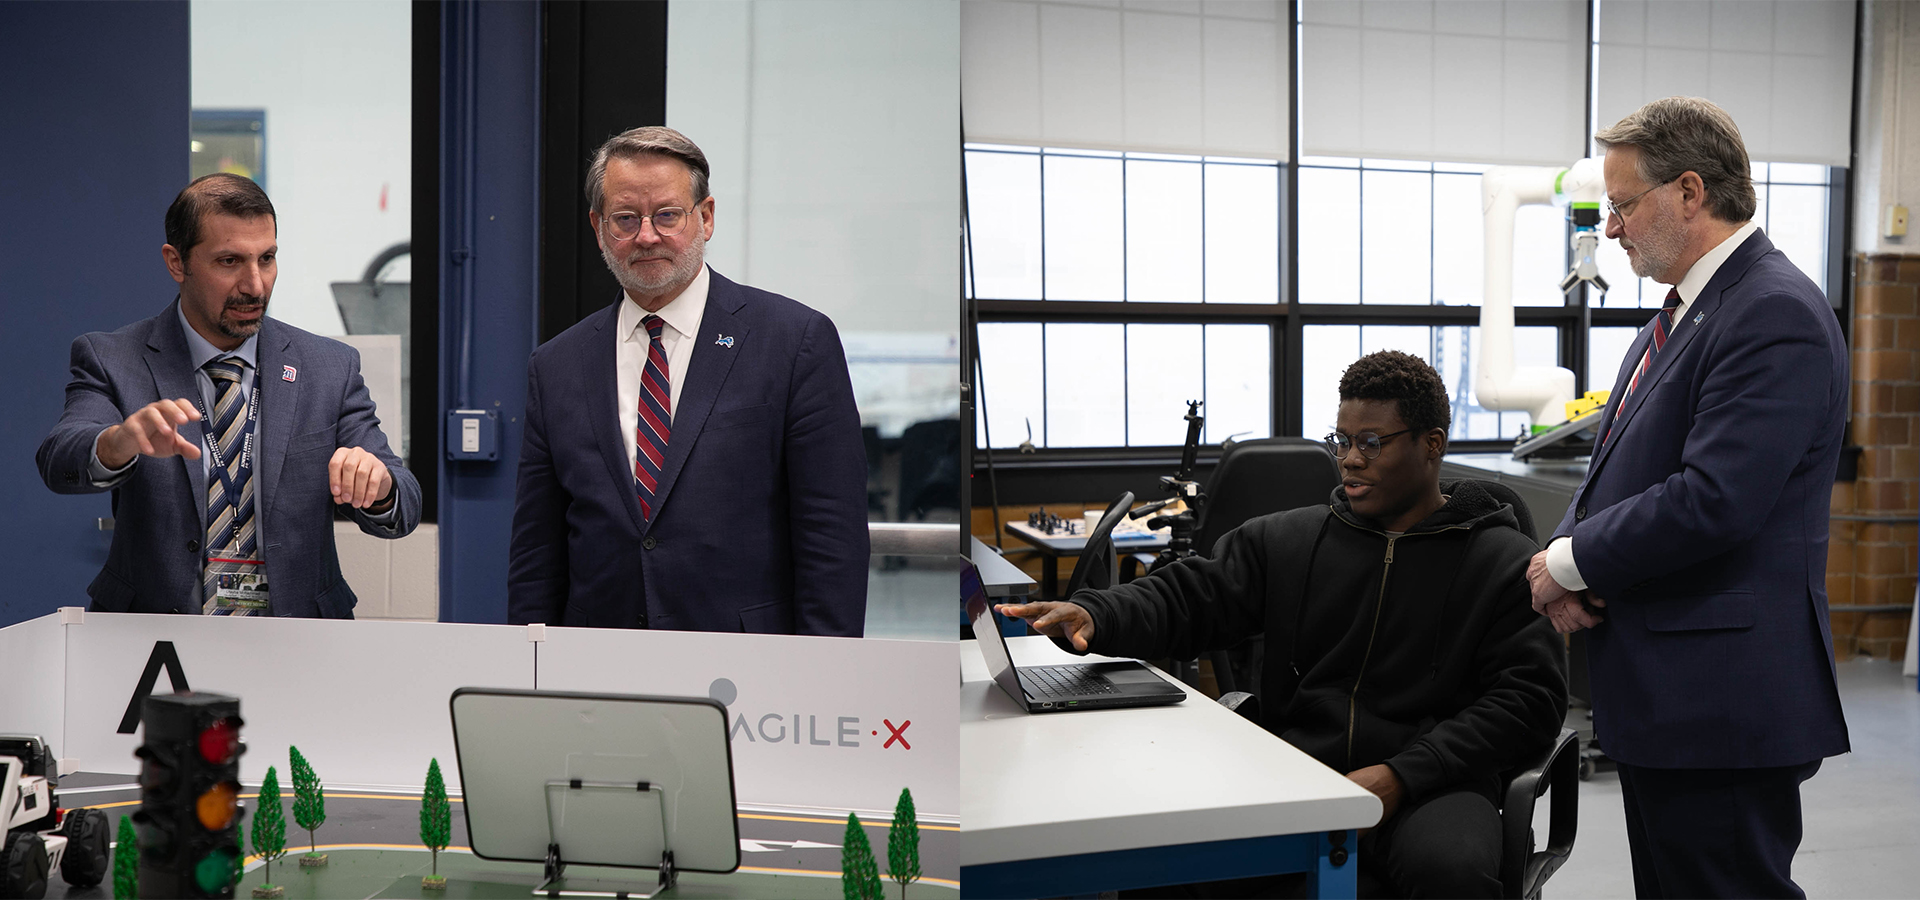 Senator Gary Peters is pictured in a pair of pictures inside of the Engineering Building, on the left with a professor looking at equipment and on the right talking with a UDM student as they look at a laptop computer.